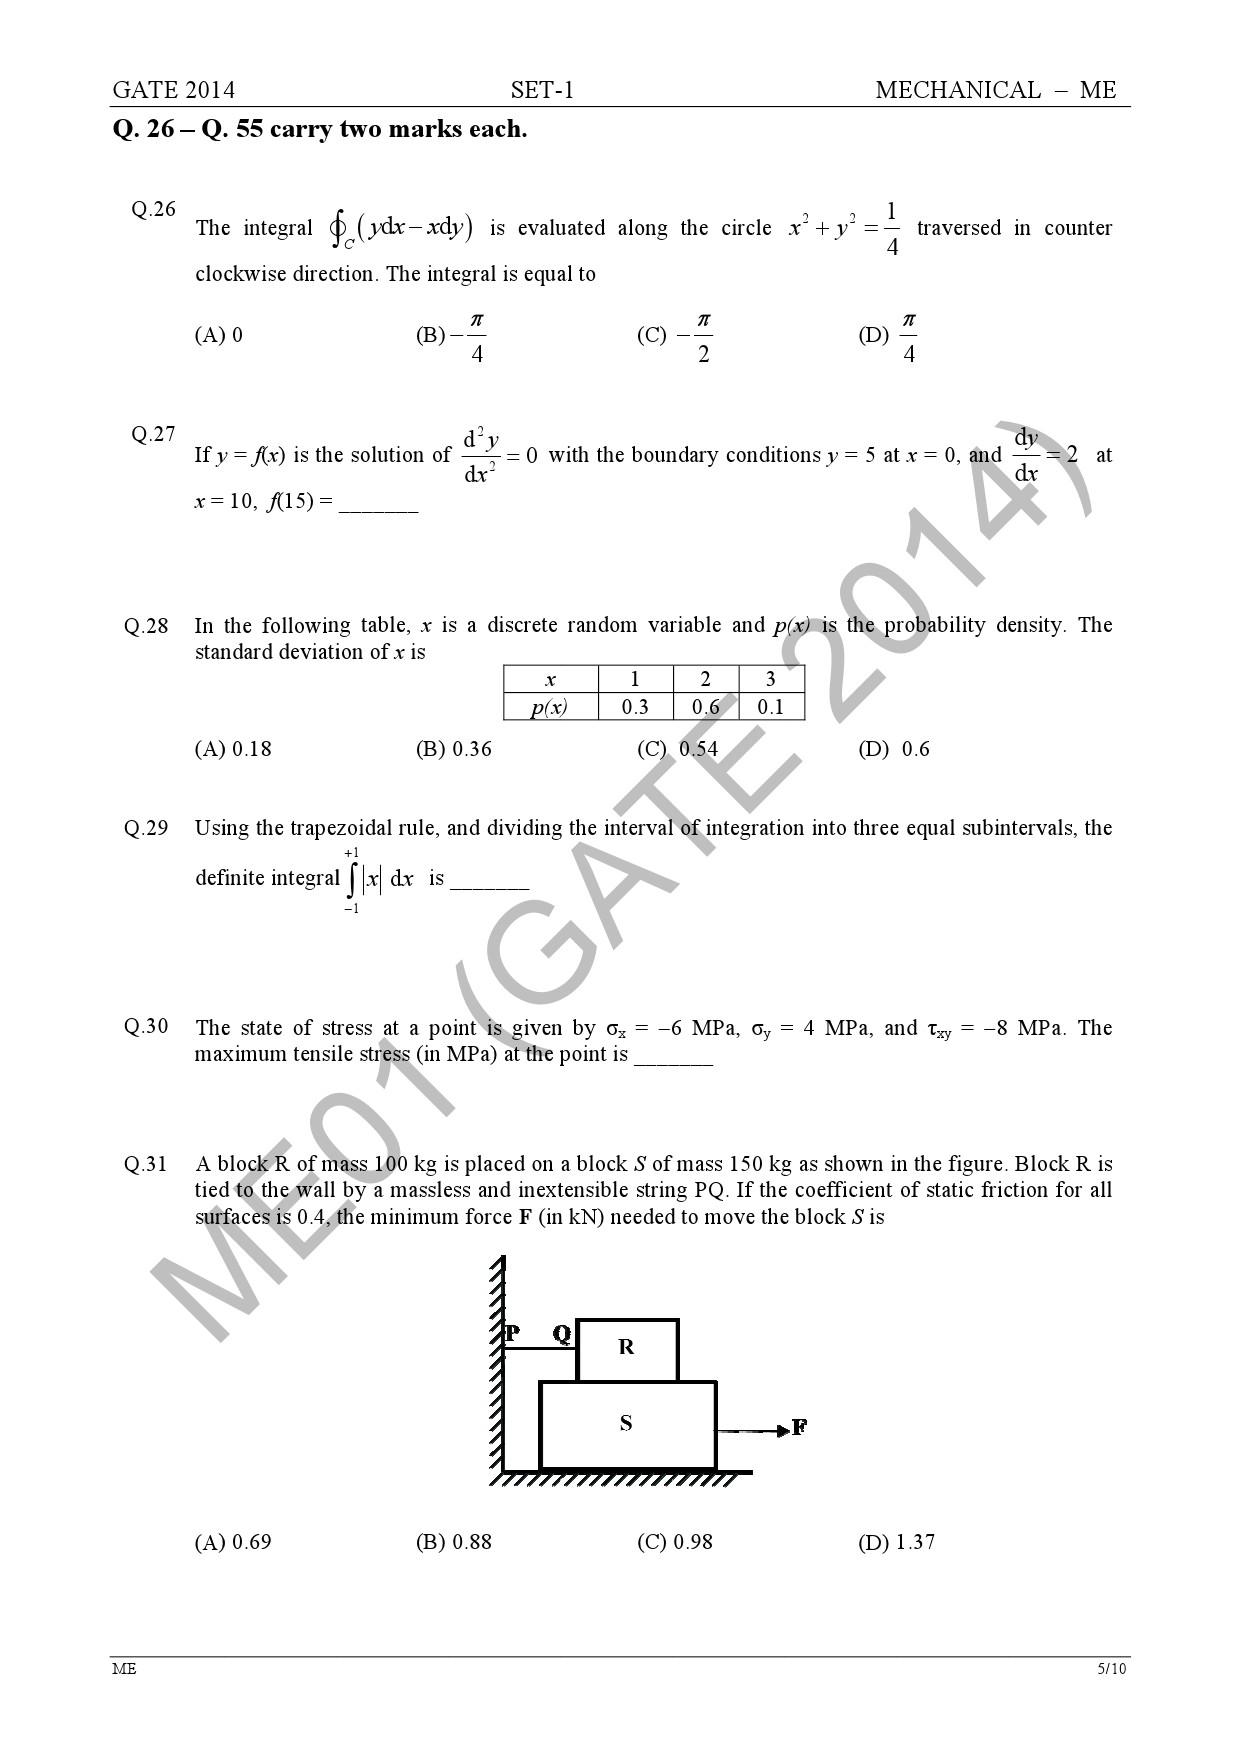 GATE Exam Question Paper 2014 Mechanical Engineering Set 1 11